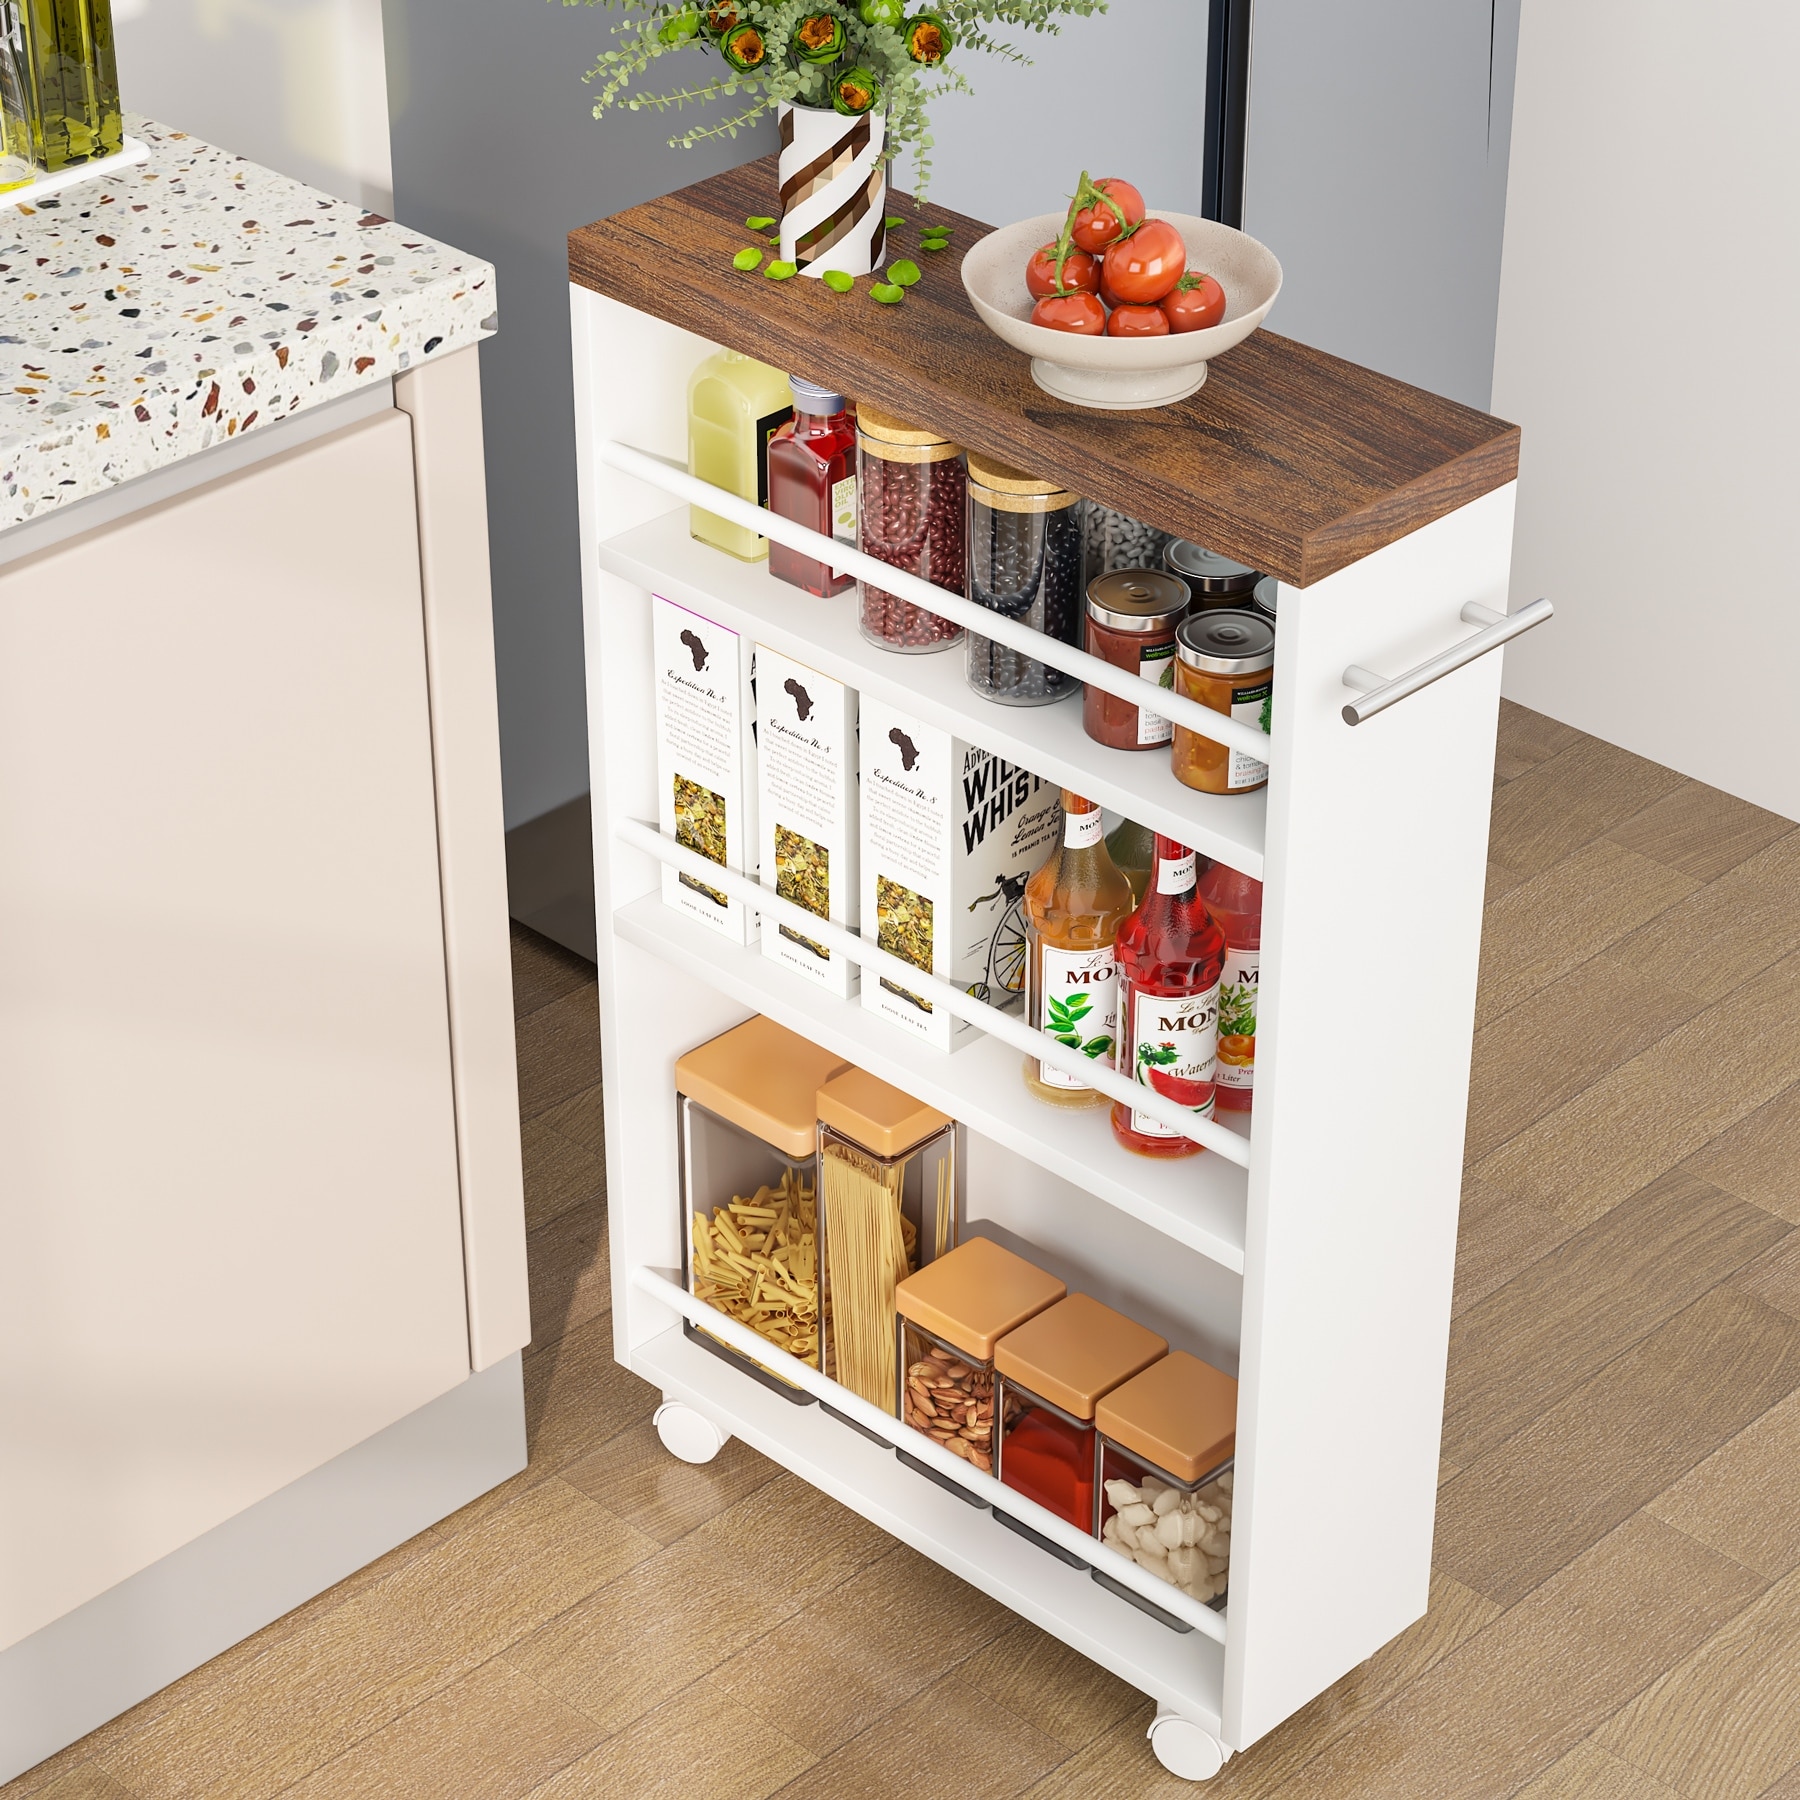 https://ak1.ostkcdn.com/images/products/is/images/direct/4b07b59a438f6652a59c103395d48d8feb787092/Slim-Storage-Cart%2C-Rolling-Narrow-Kitchen-Cart-on-Wheels.jpg